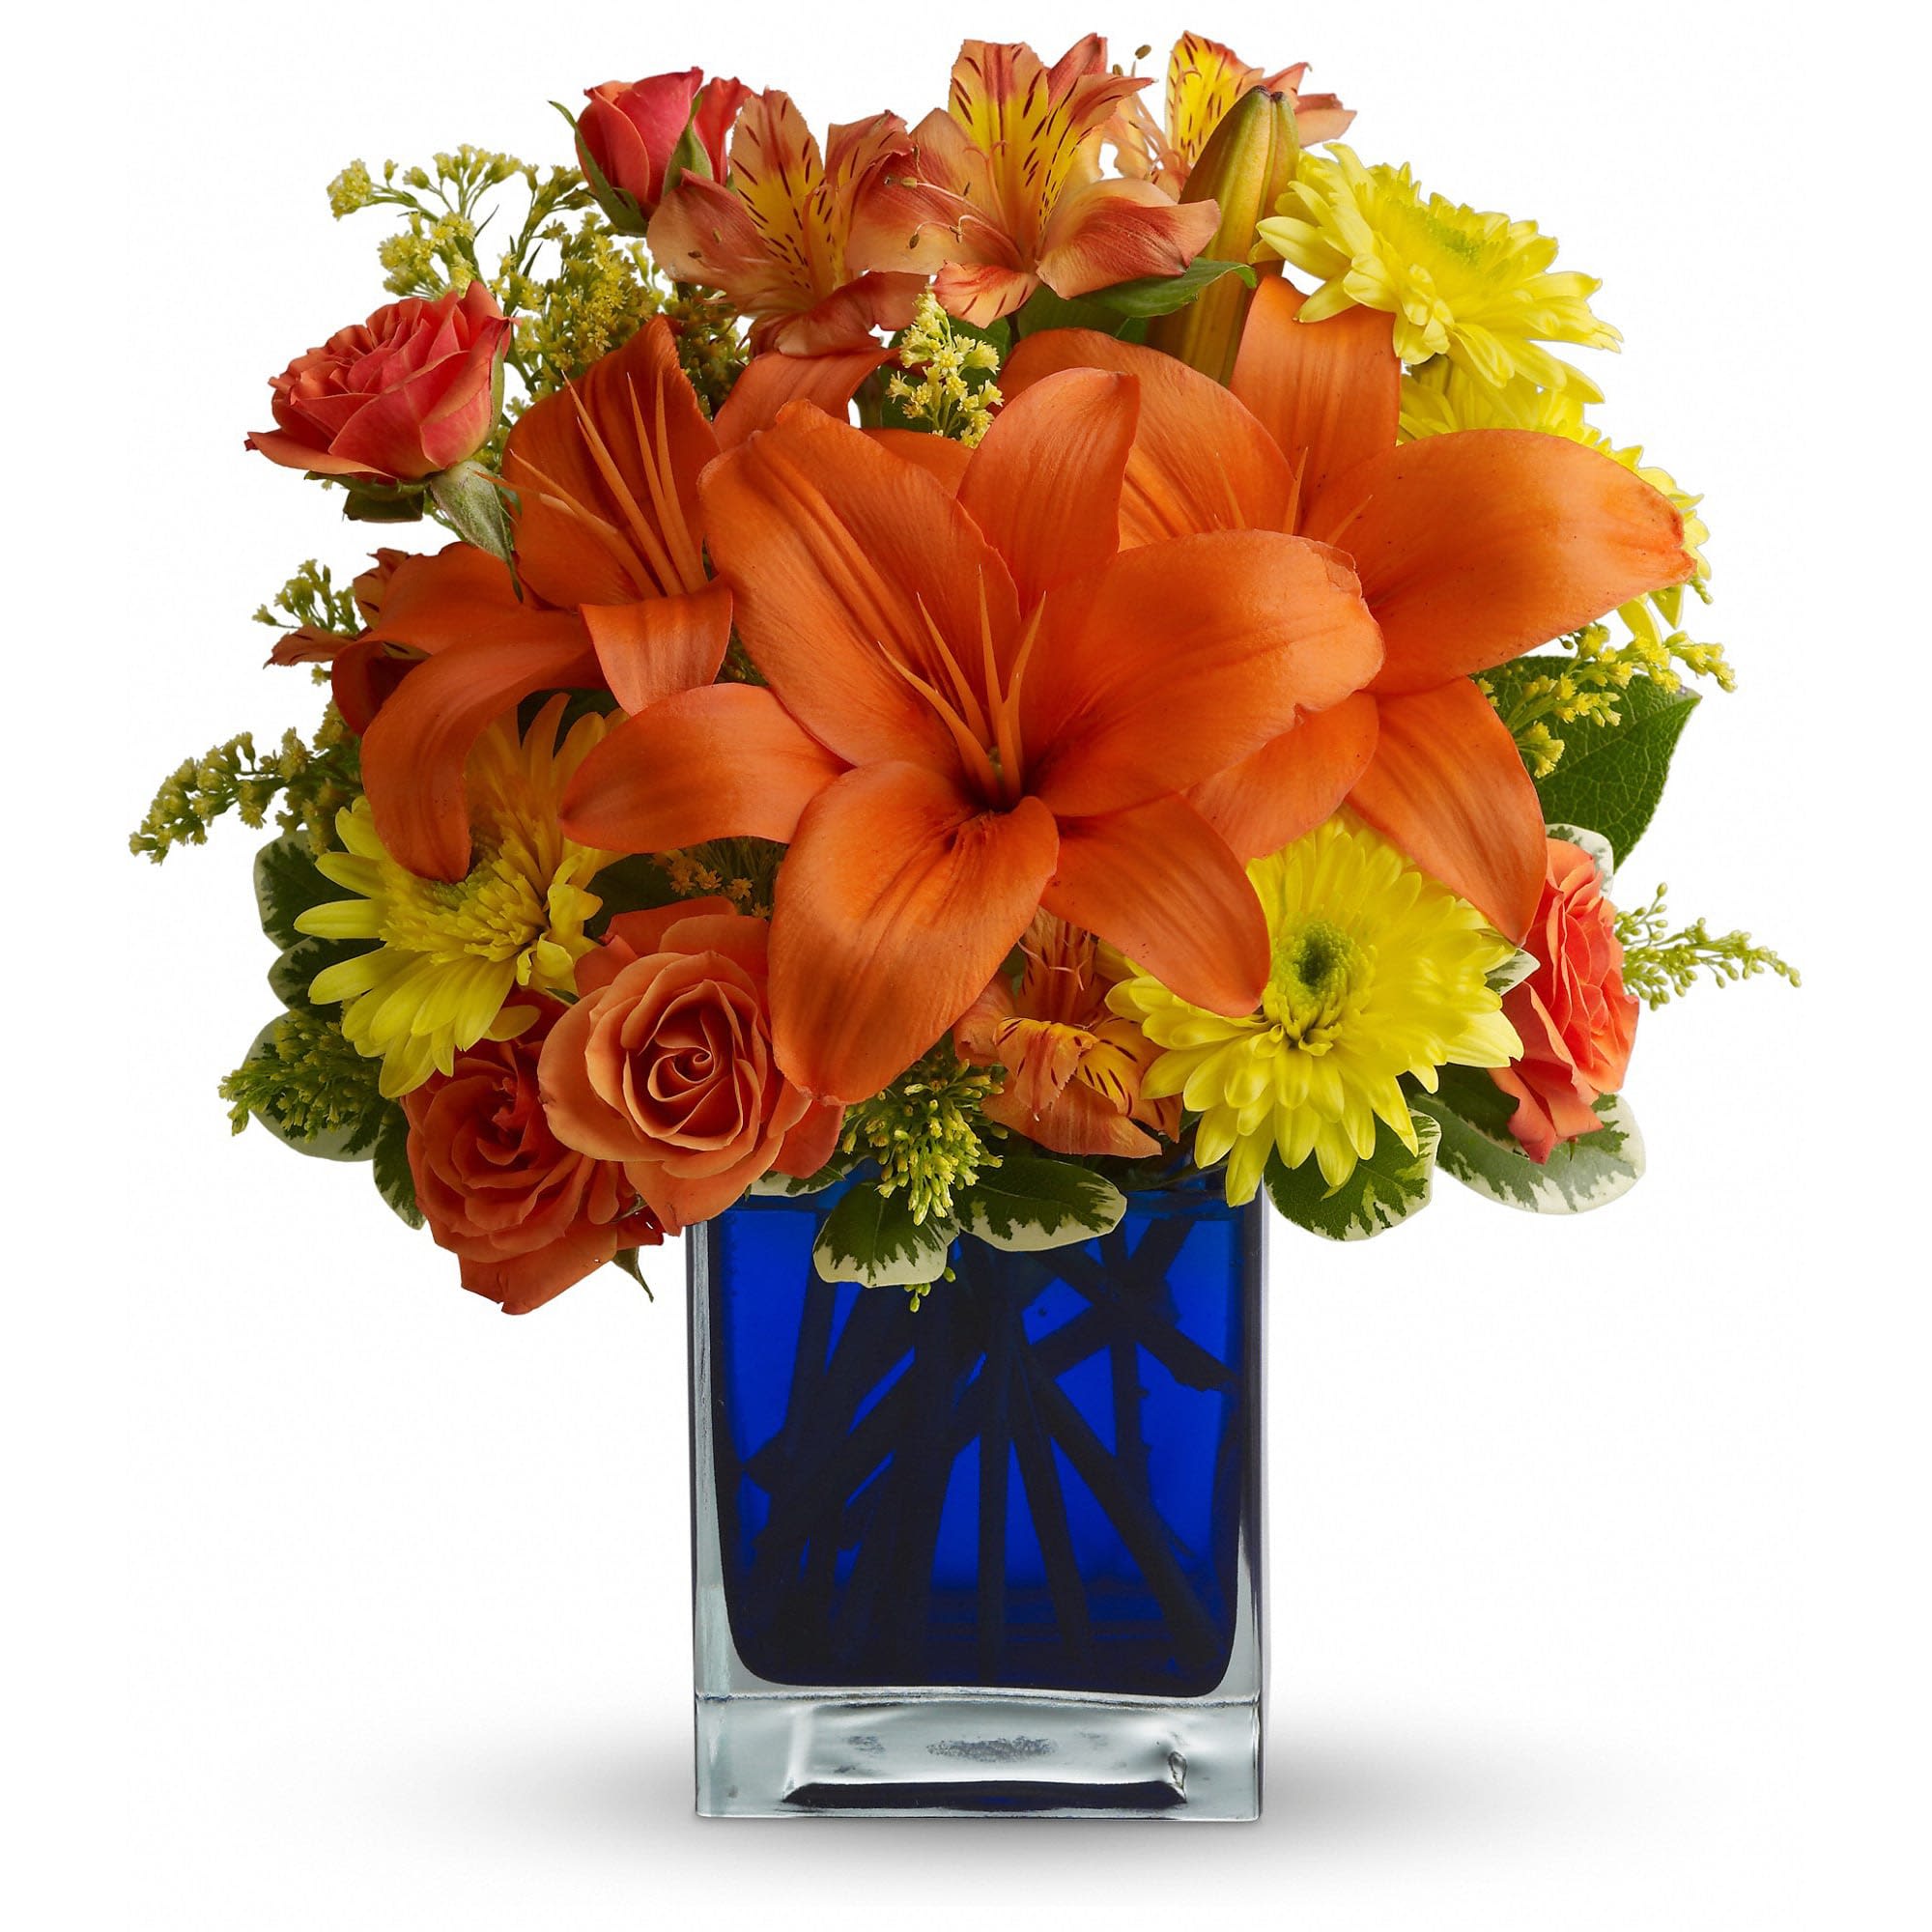 Summer Nights by Teleflora - Flower power rises several degrees in this brilliant array of hot summer flowers in a cool blue contemporary glass cube vase. Send this gift of indoor sunshine to someone close to you. 